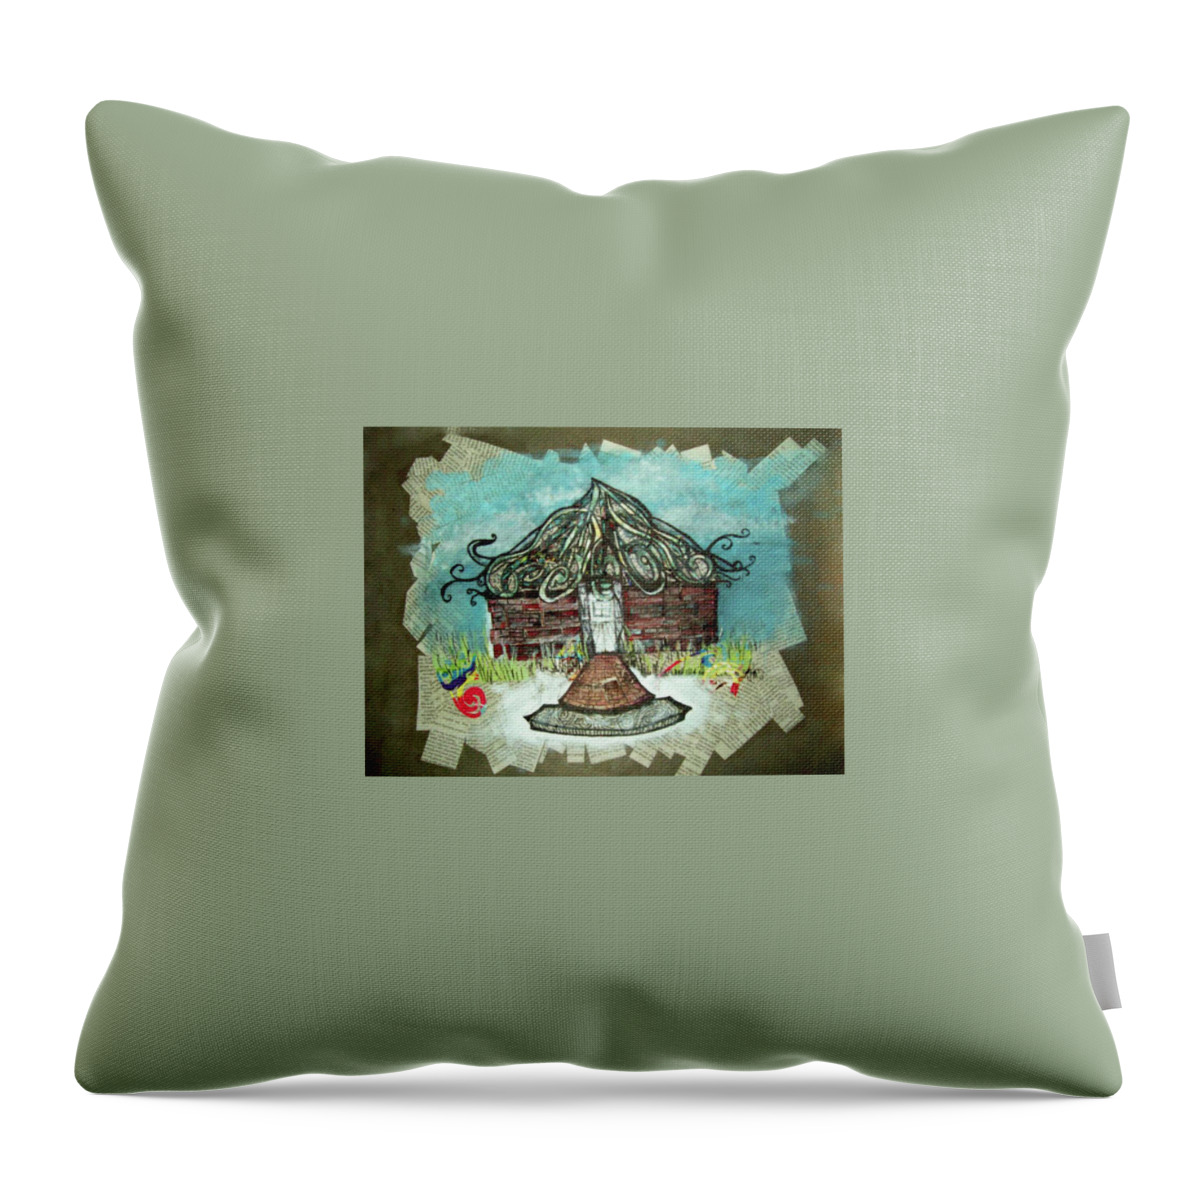 Mixed Media Throw Pillow featuring the mixed media Brick House by Emily Perry